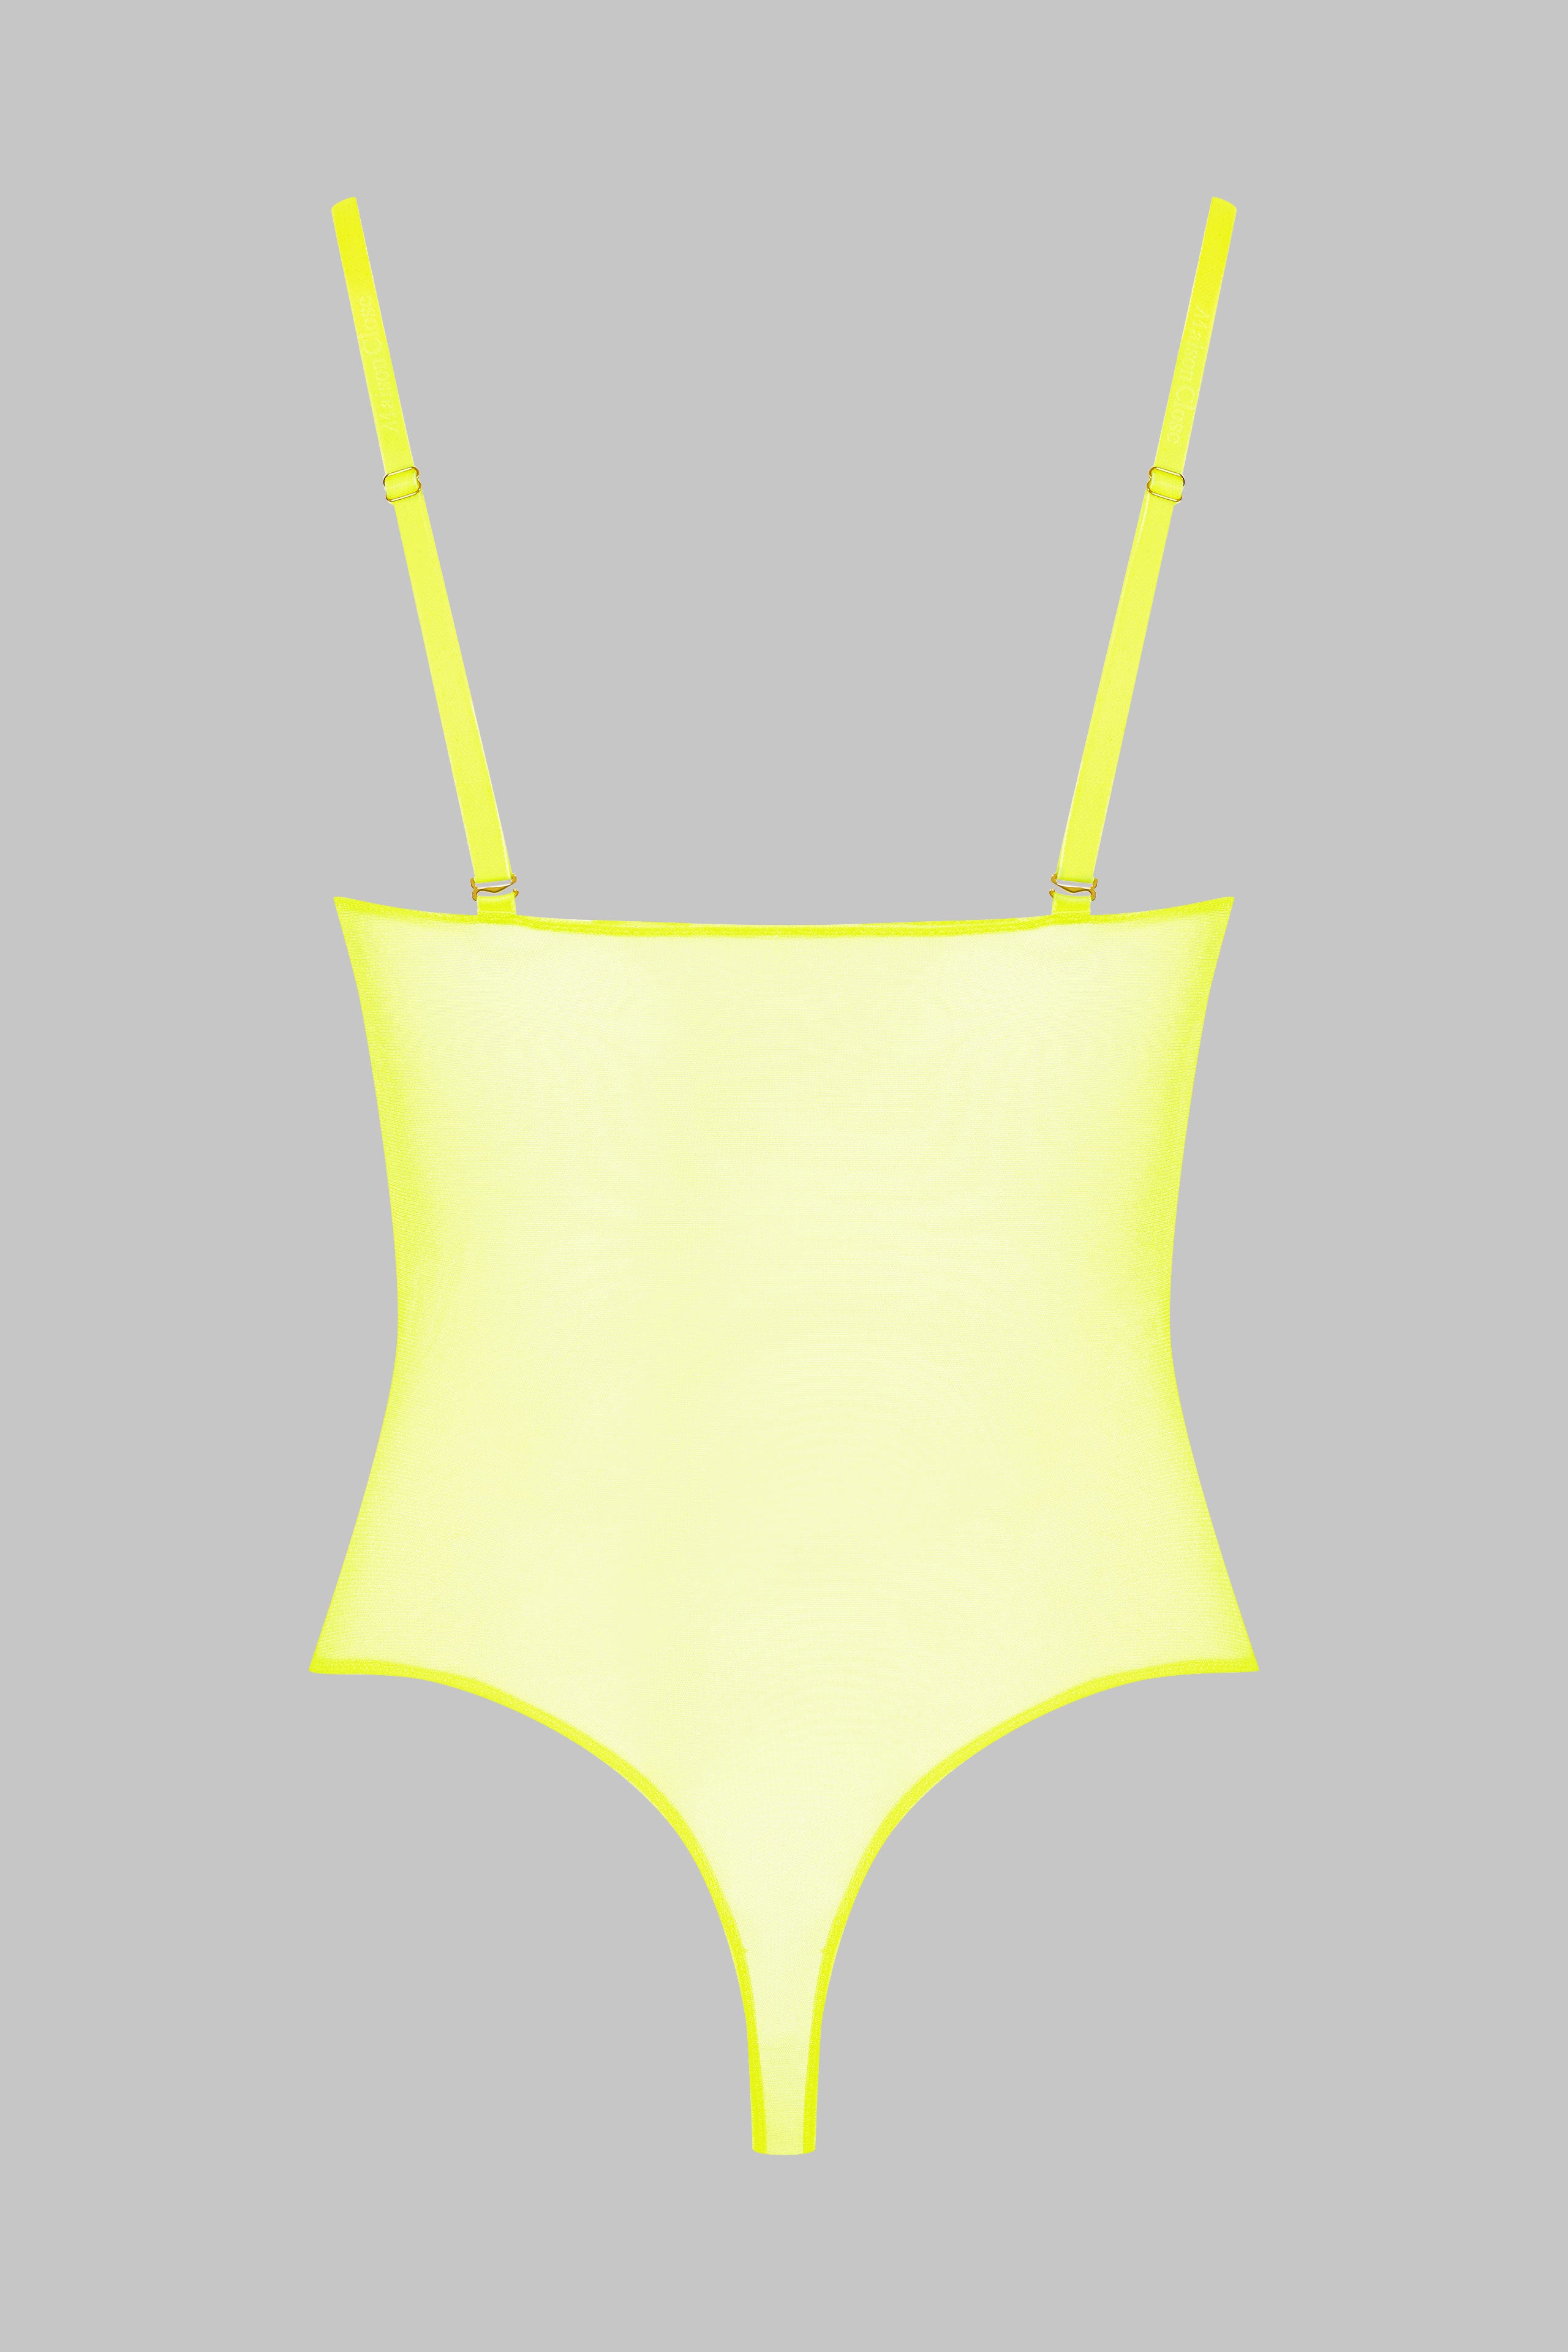 body-string-corps-a-corps-neon-jaune-fluo-or-maison-close